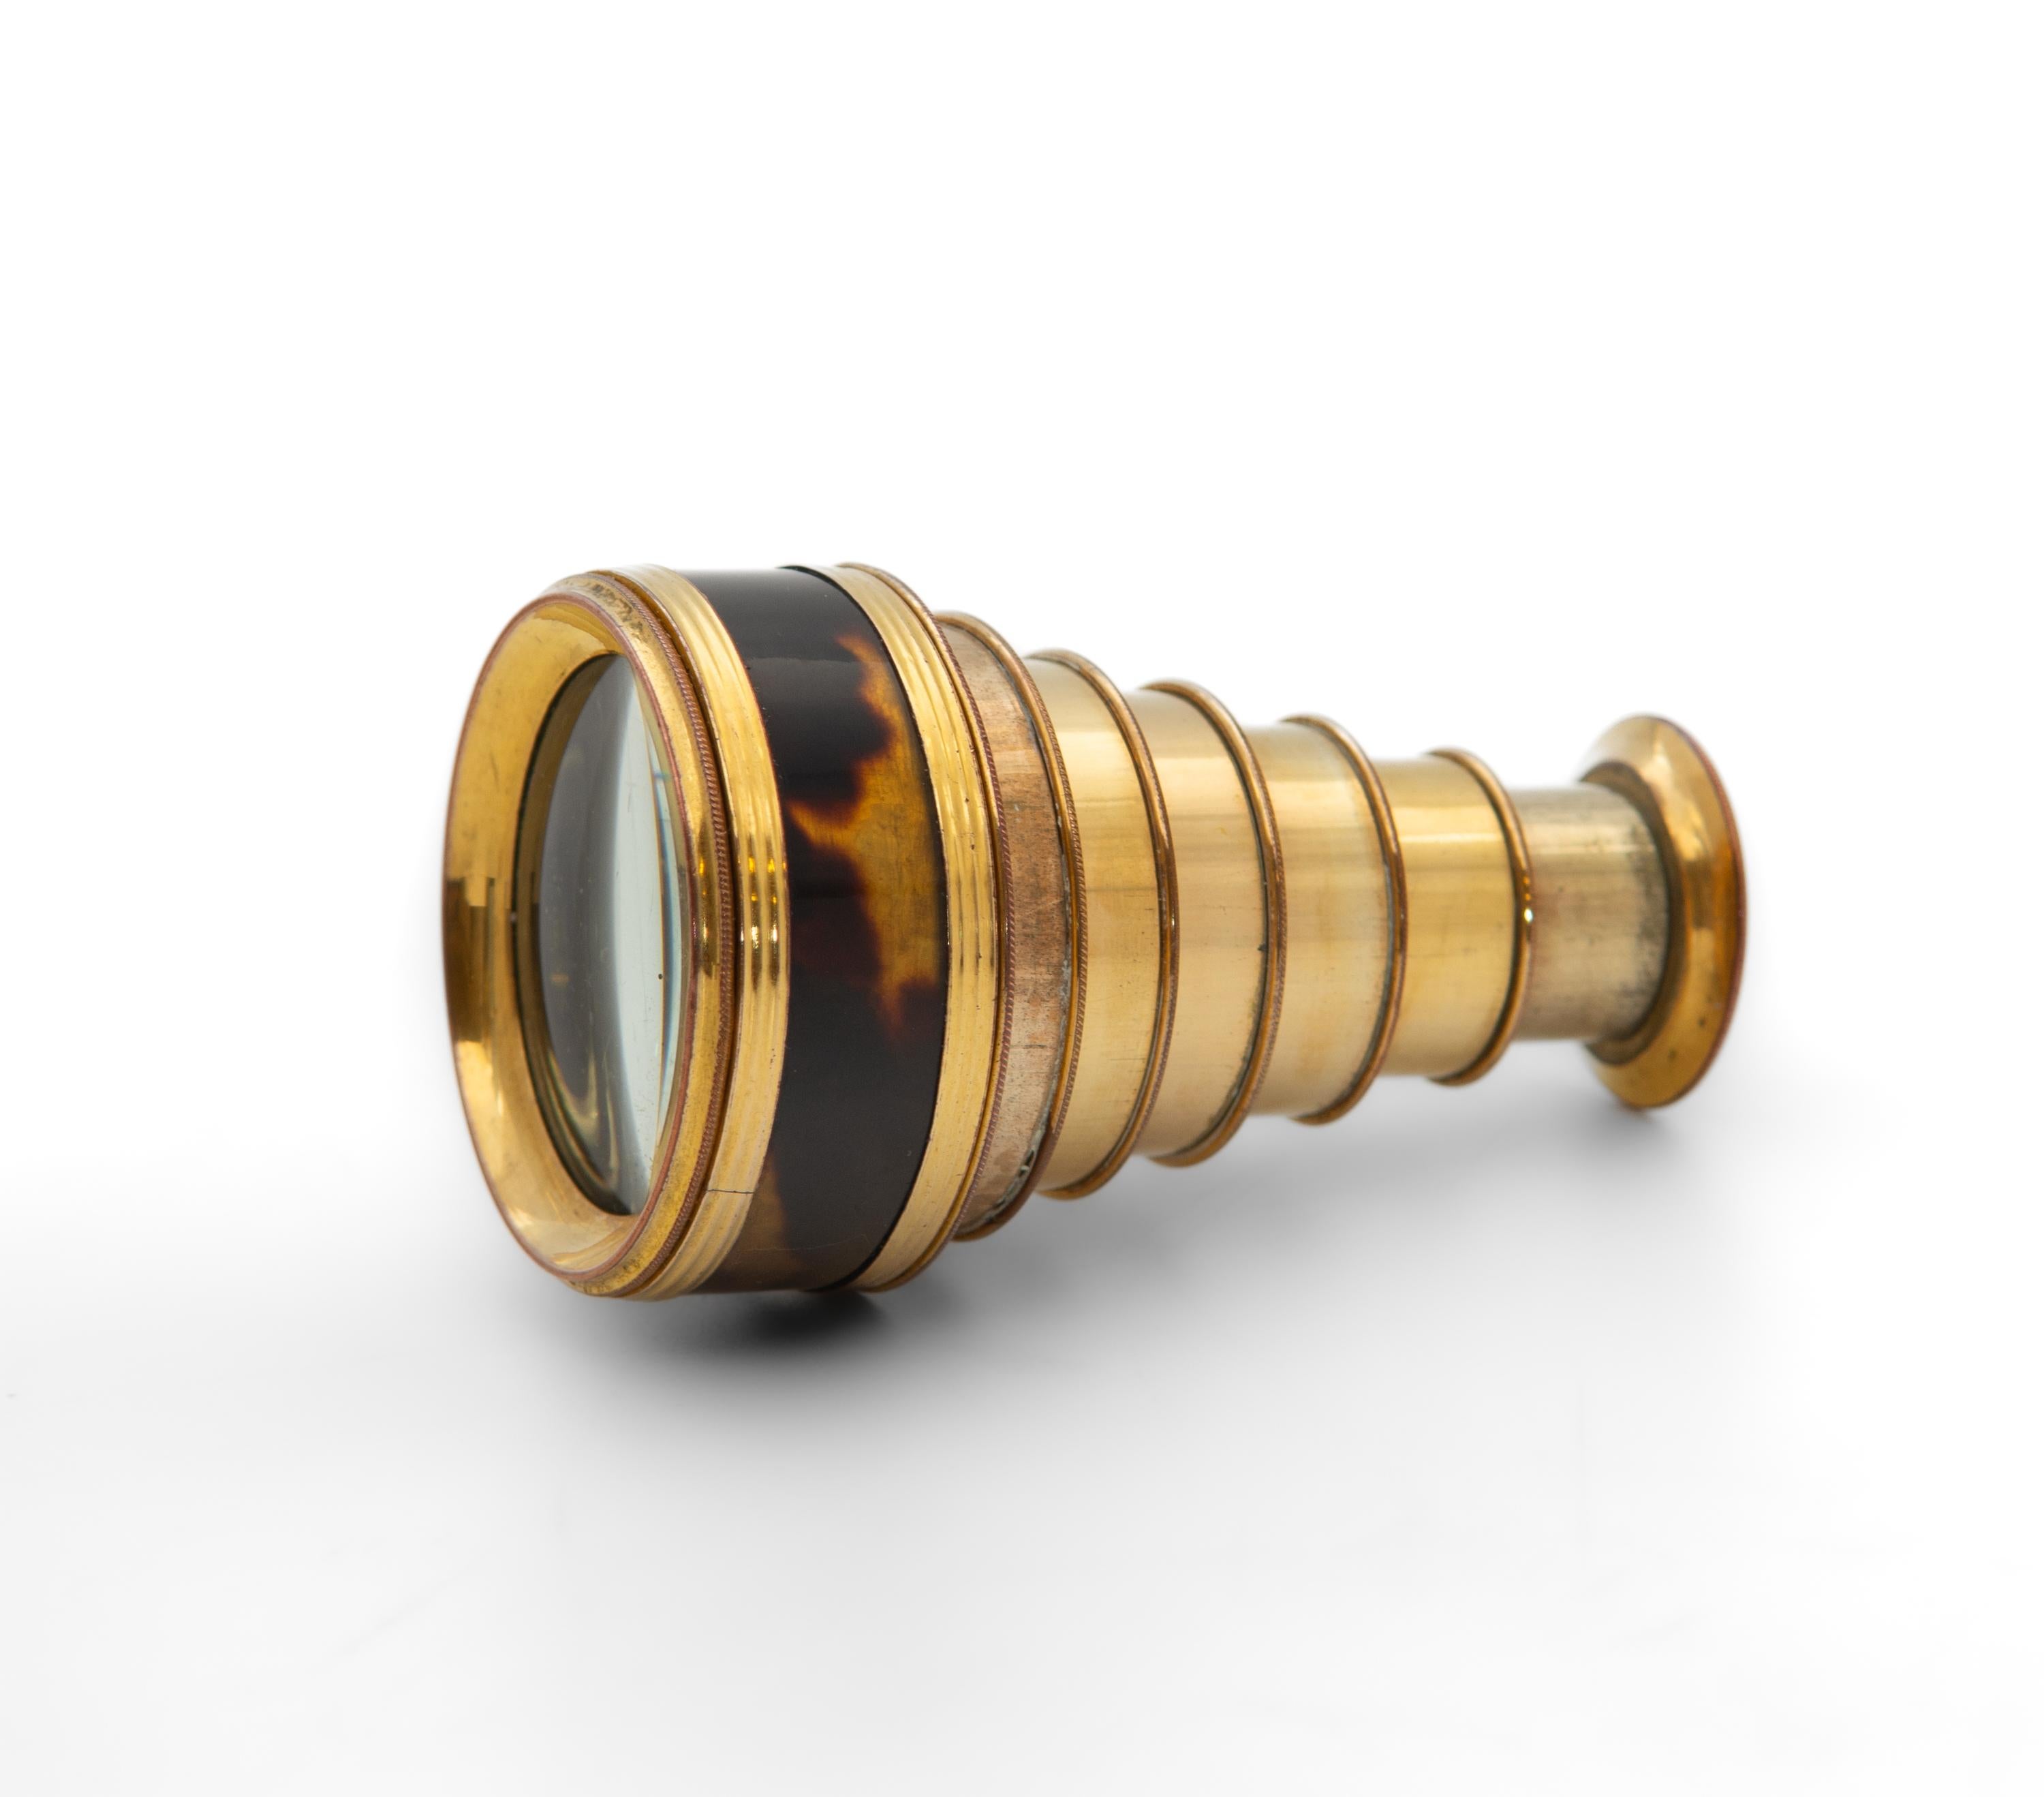 19th Century pocket telescope gilt brass and faux tortoiseshell spyglass, each friction fitting is tapering and collapsible with millegrain edges.

In good condition, showing some light signs of use. The light scratching to the glass and rubbing to